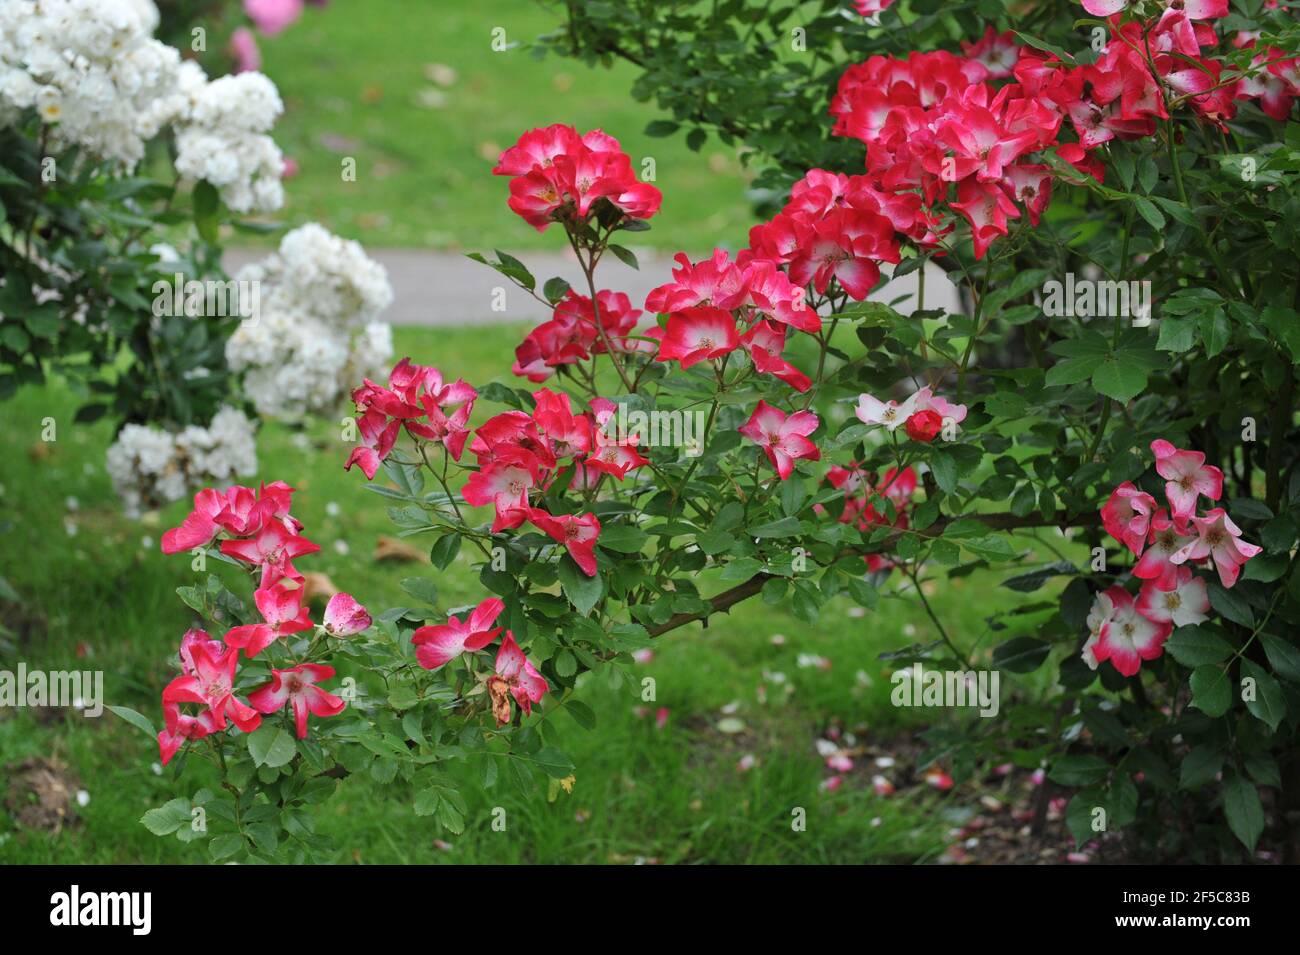 Deep pink with a white eye Hybrid Musk rose (Rosa) Bukavu blooms in a garden in June Stock Photo